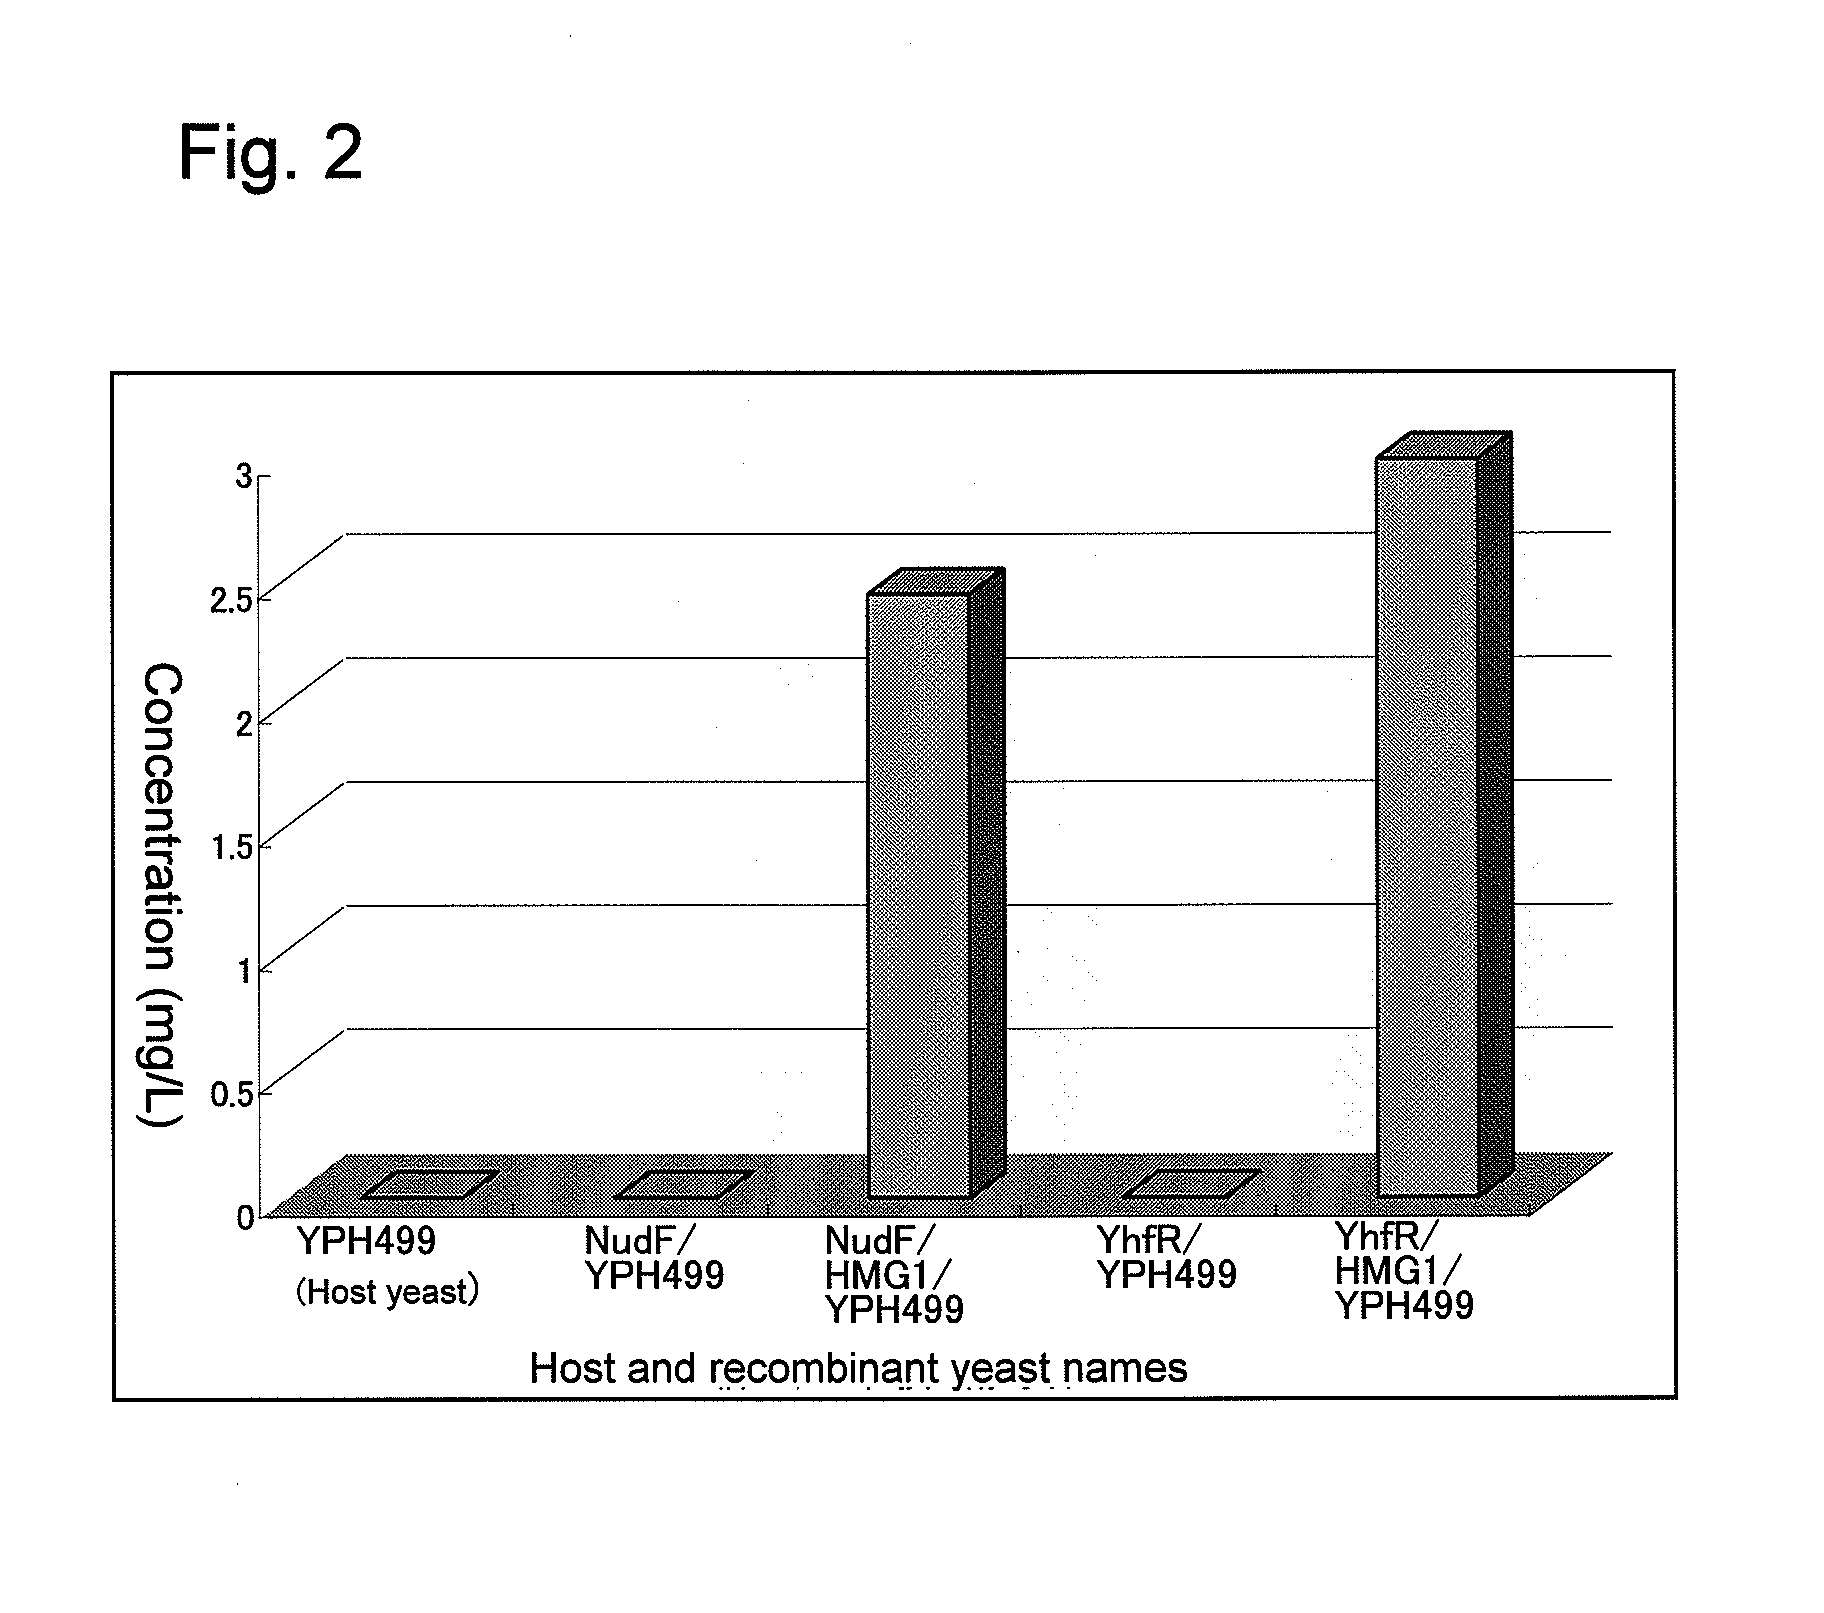 Recombinant yeast and branched alcohol production method using recombinant yeast